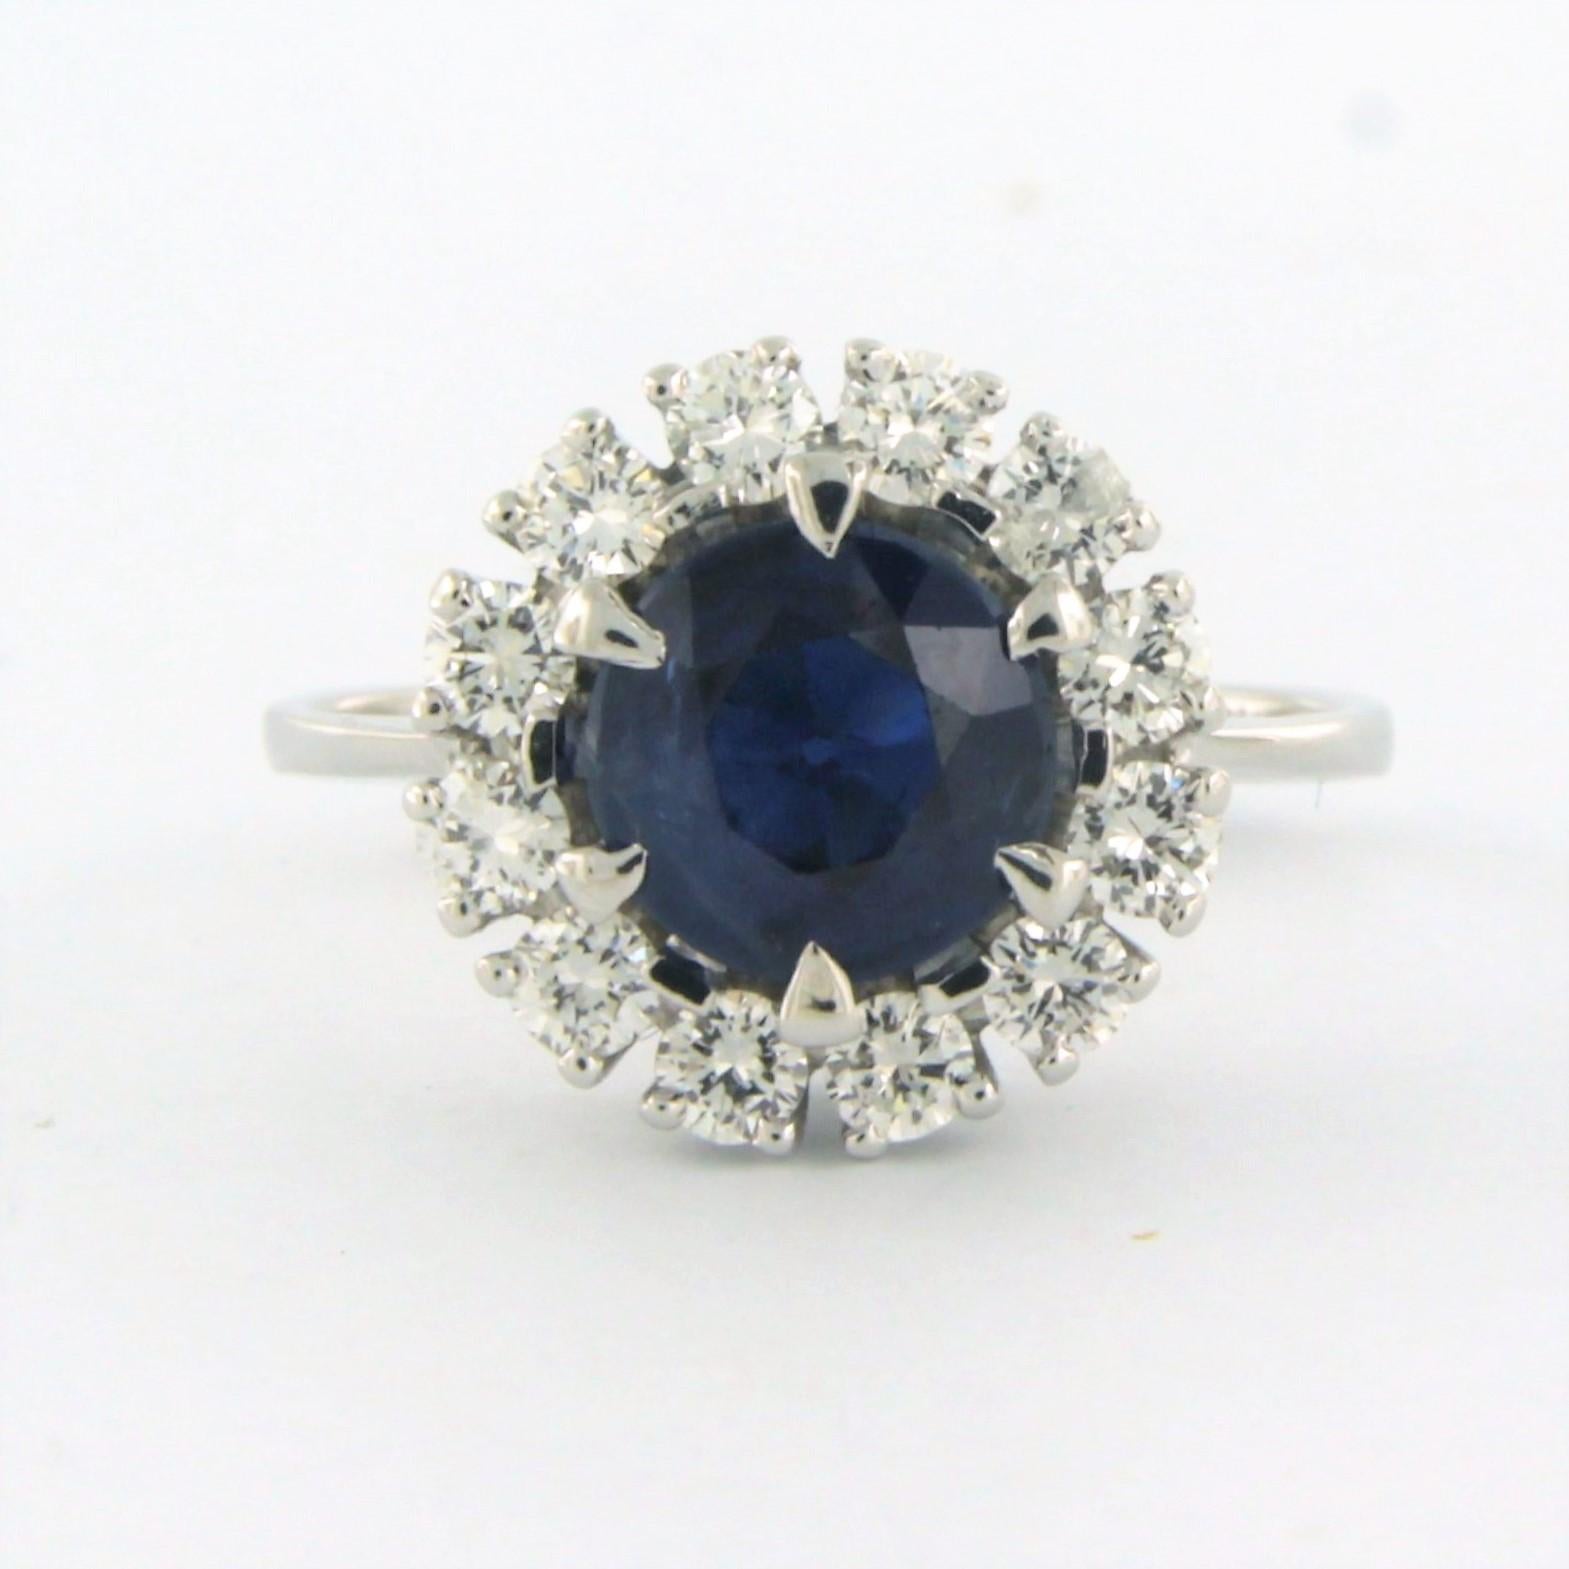 18 kt white gold entourage ring set with a sapphire in the centre. 2.00ct and an entourage brilliant cut diamond up to. 0.60 ct - F/G - VS/SI - ring size U.S. 7.5 - EU. 17.75(56)

detailed description:

The top of the ring has a diameter of 1.3 cm